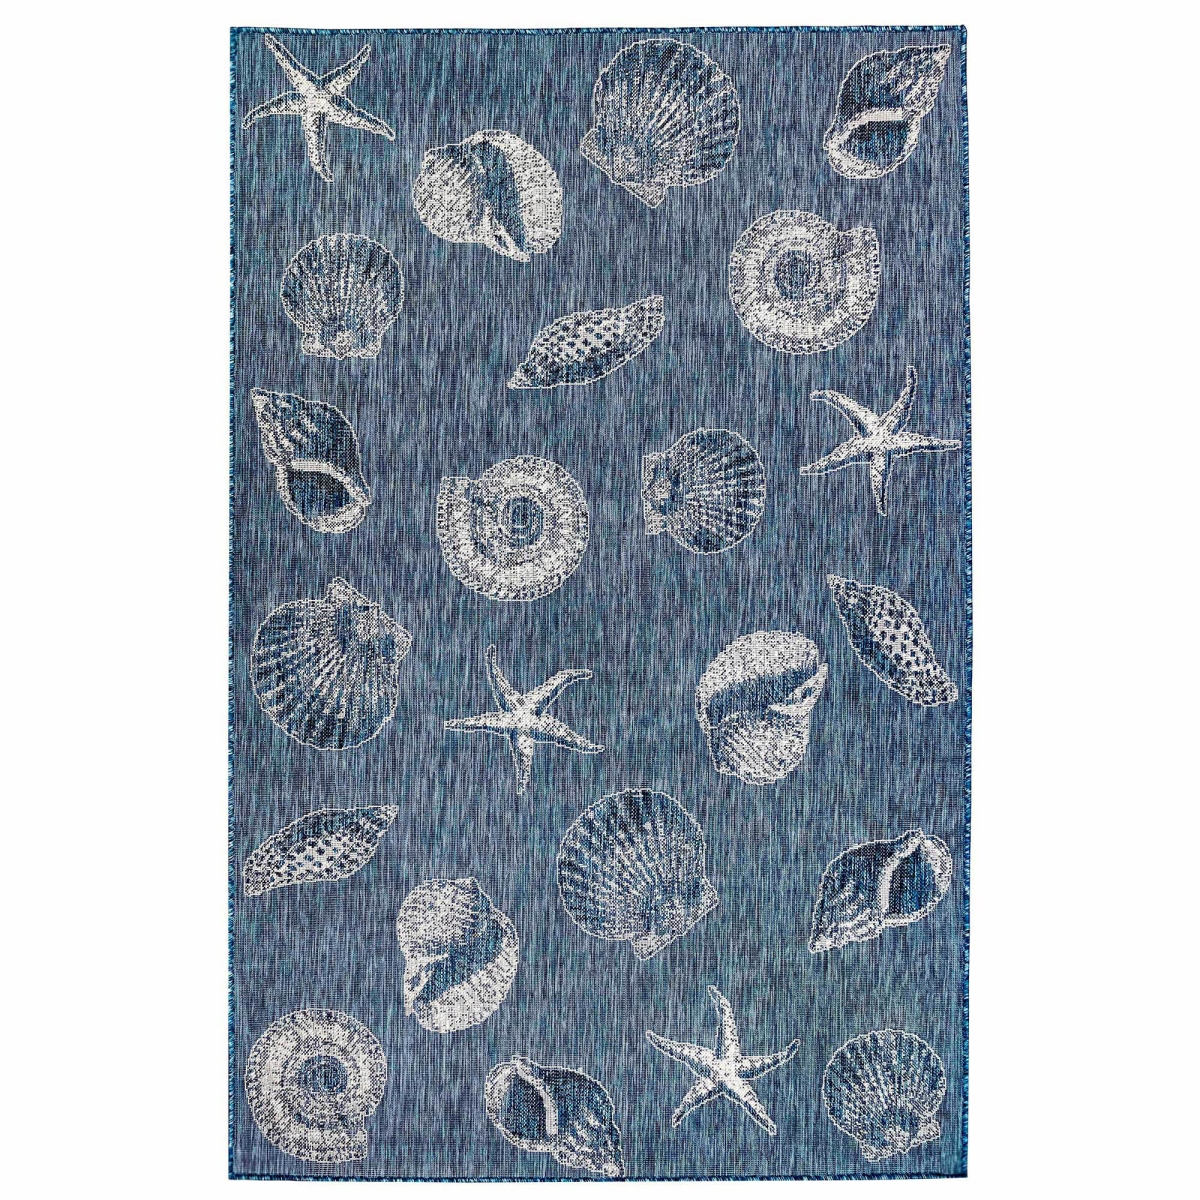 Trans-ocean Imports Cred8841433 7 Ft. 10 In. Round Liora Manne Carmel Shells Indoor & Outdoor Rug Wilton Woven Round Rug - Navy